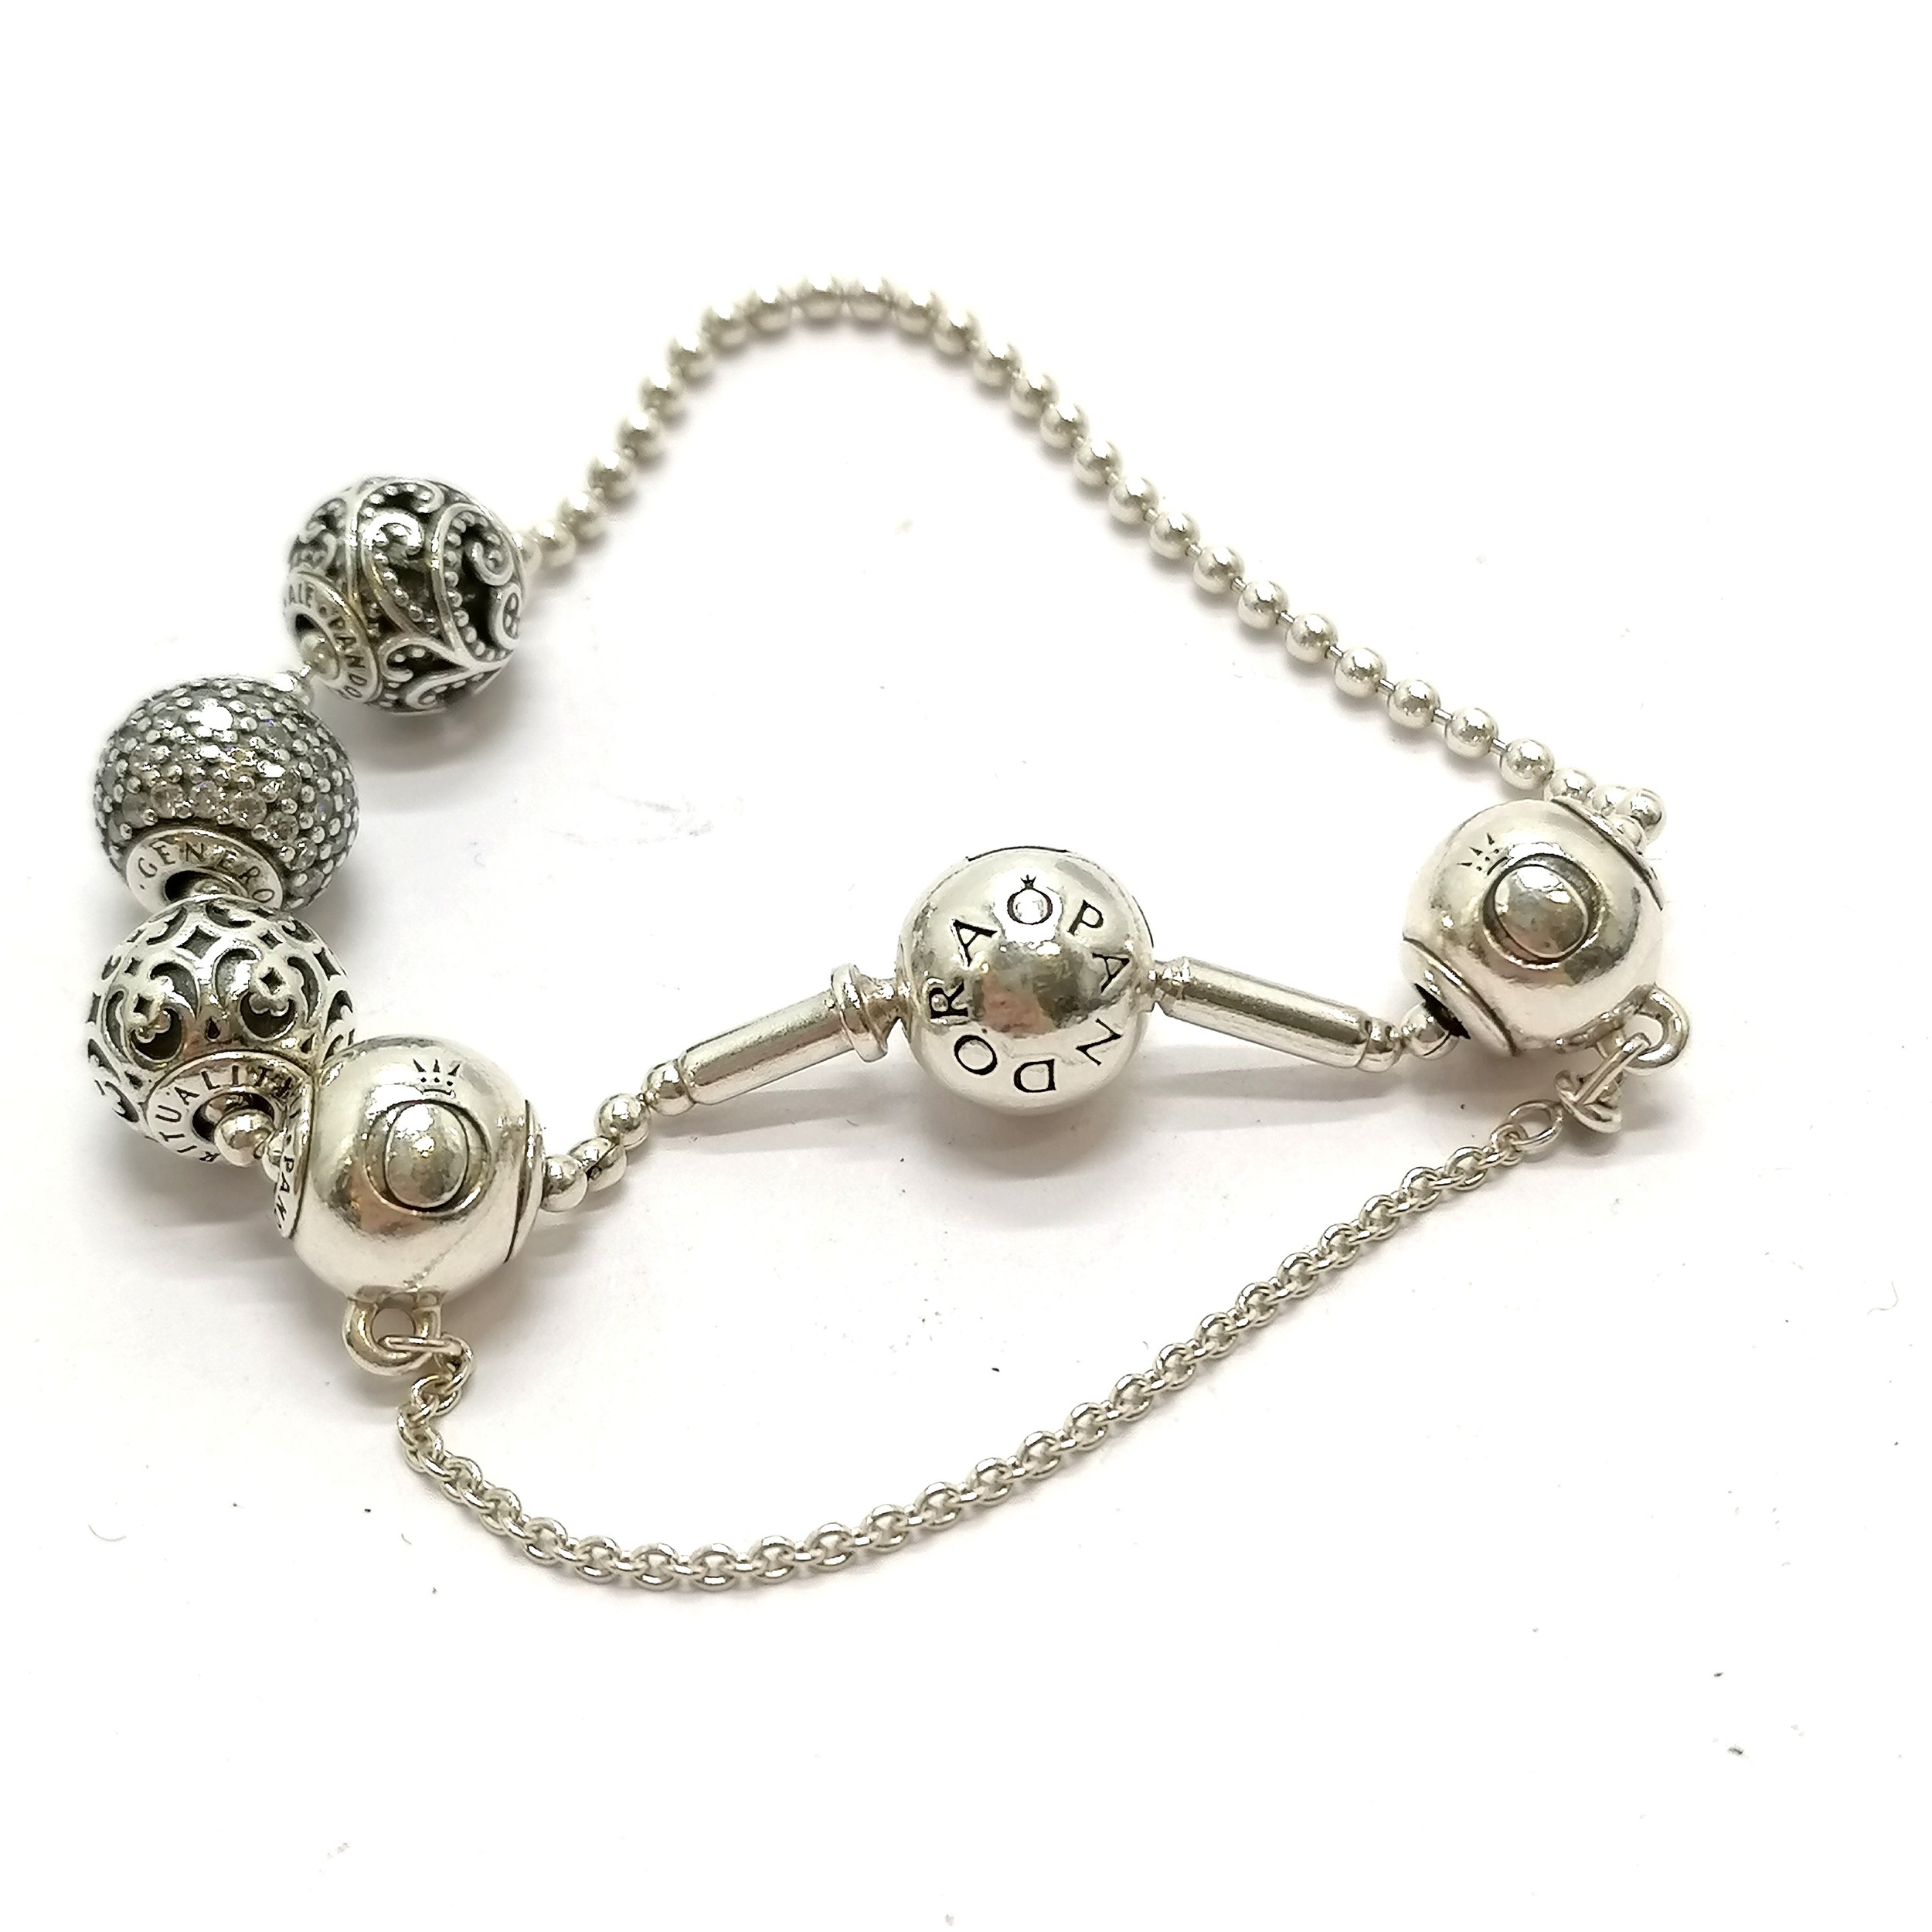 Pandora silver bracelet with 5 Pandora beads - 15.6g - SOLD ON BEHALF OF THE NEW BREAST CANCER